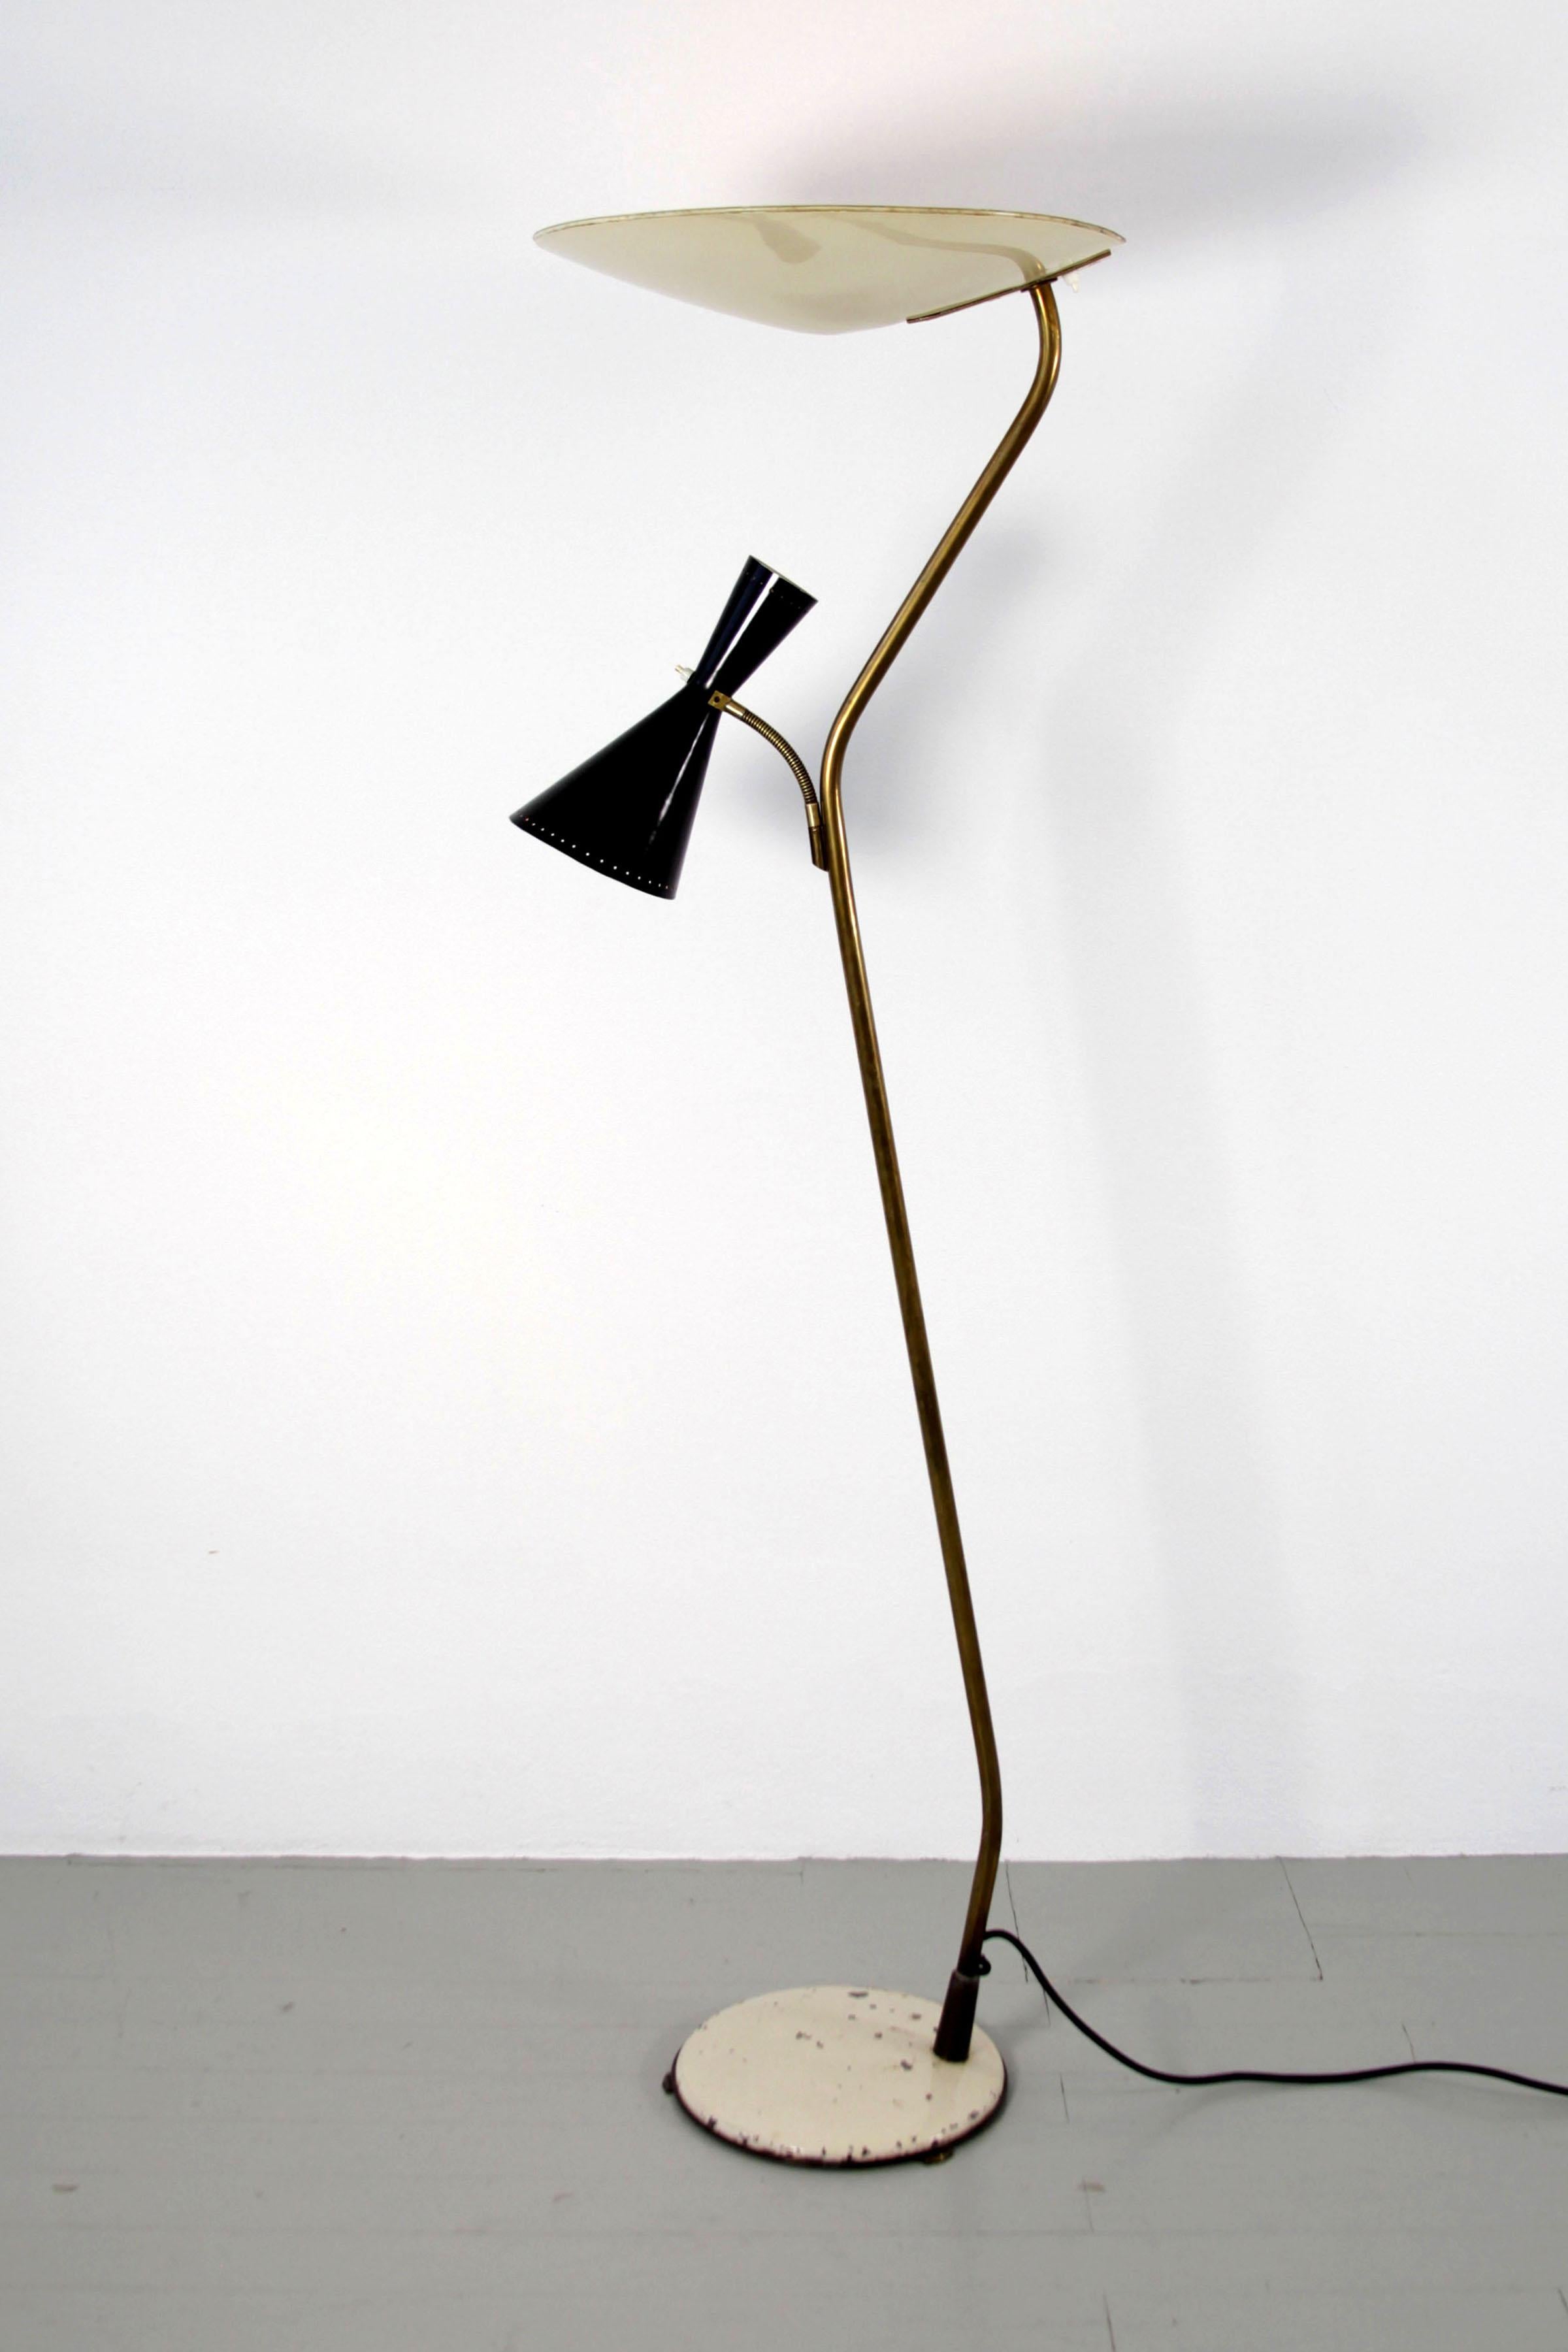 Brass Floor Lamp with Lacquered Metal Shades, by Eberth Zürich, Switzerland, 1950s For Sale